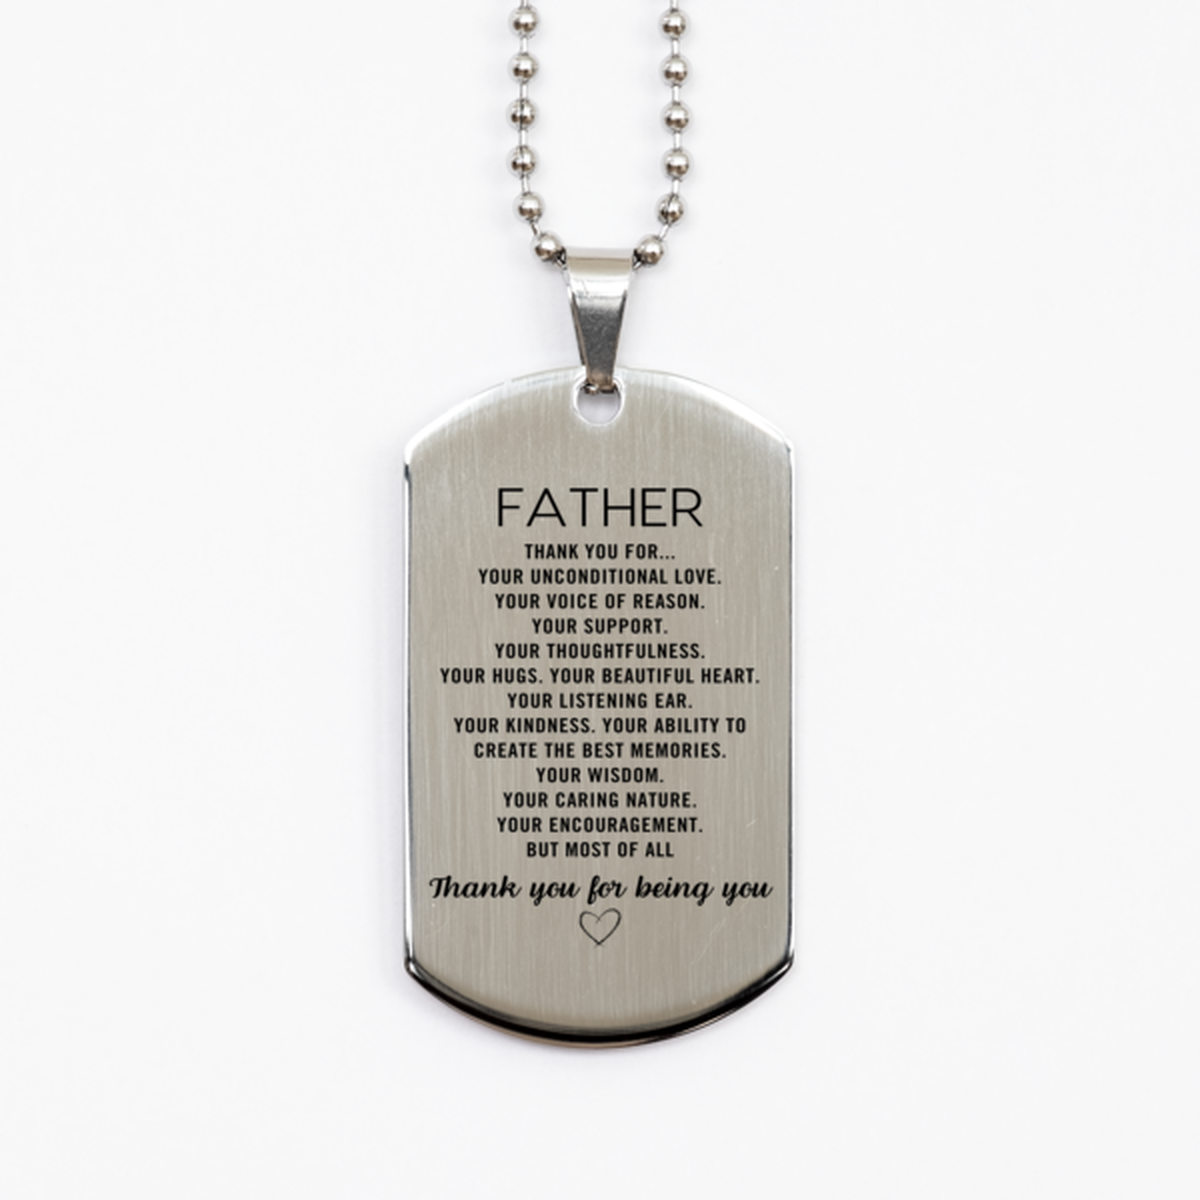 Father Silver Dog Tag Custom, Engraved Gifts For Father Christmas Graduation Birthday Gifts for Men Women Father Thank you for Your unconditional love